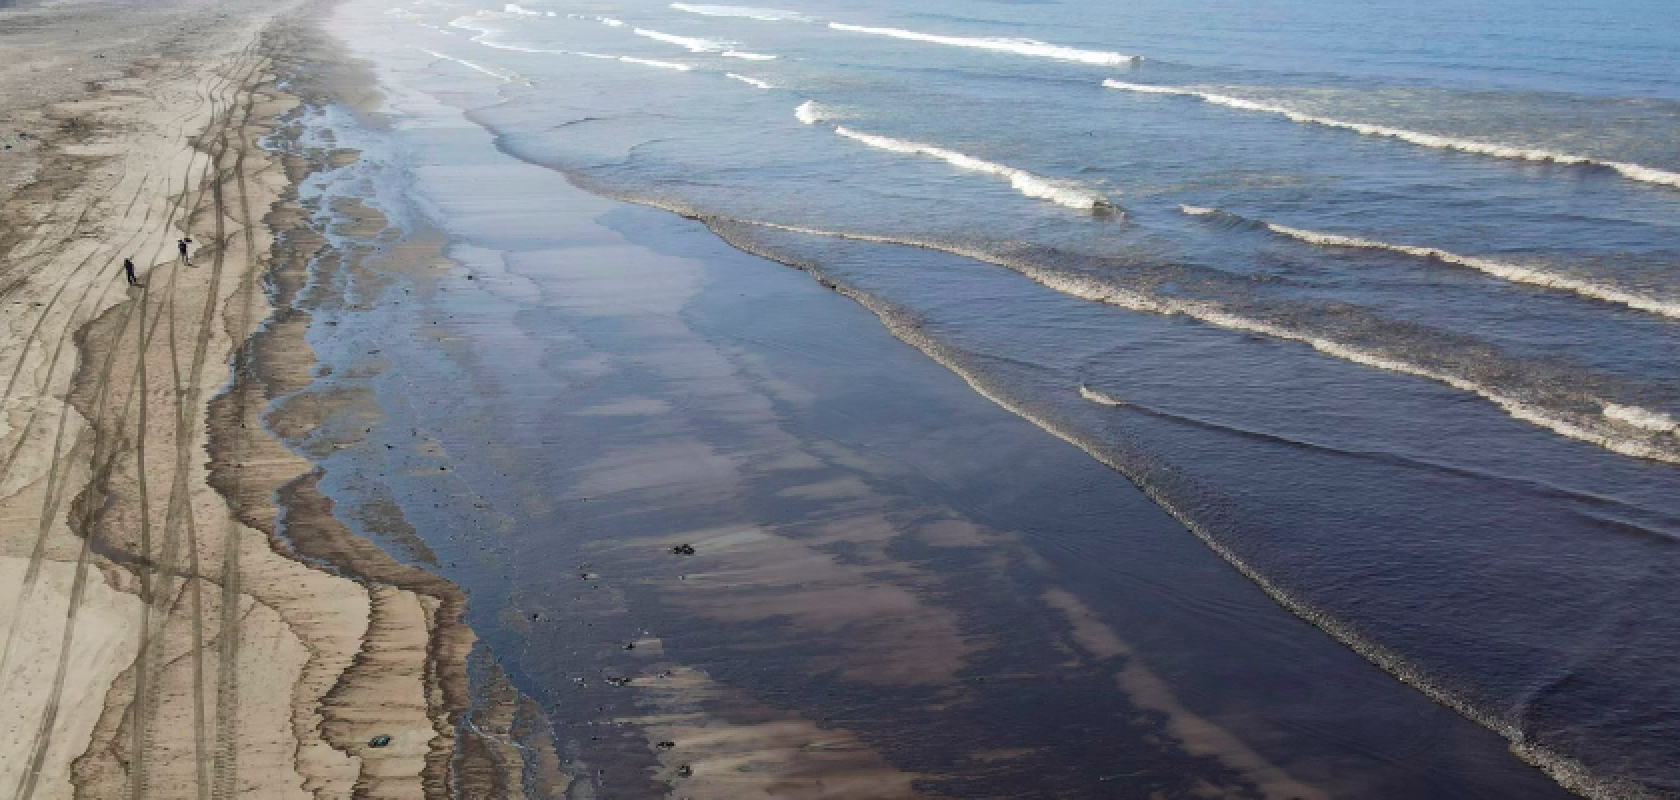 The researchers identified cork as suitable candidate for helping with oil spill clean-ups after coming across its wettability during another project (Image: EcoHubMap)